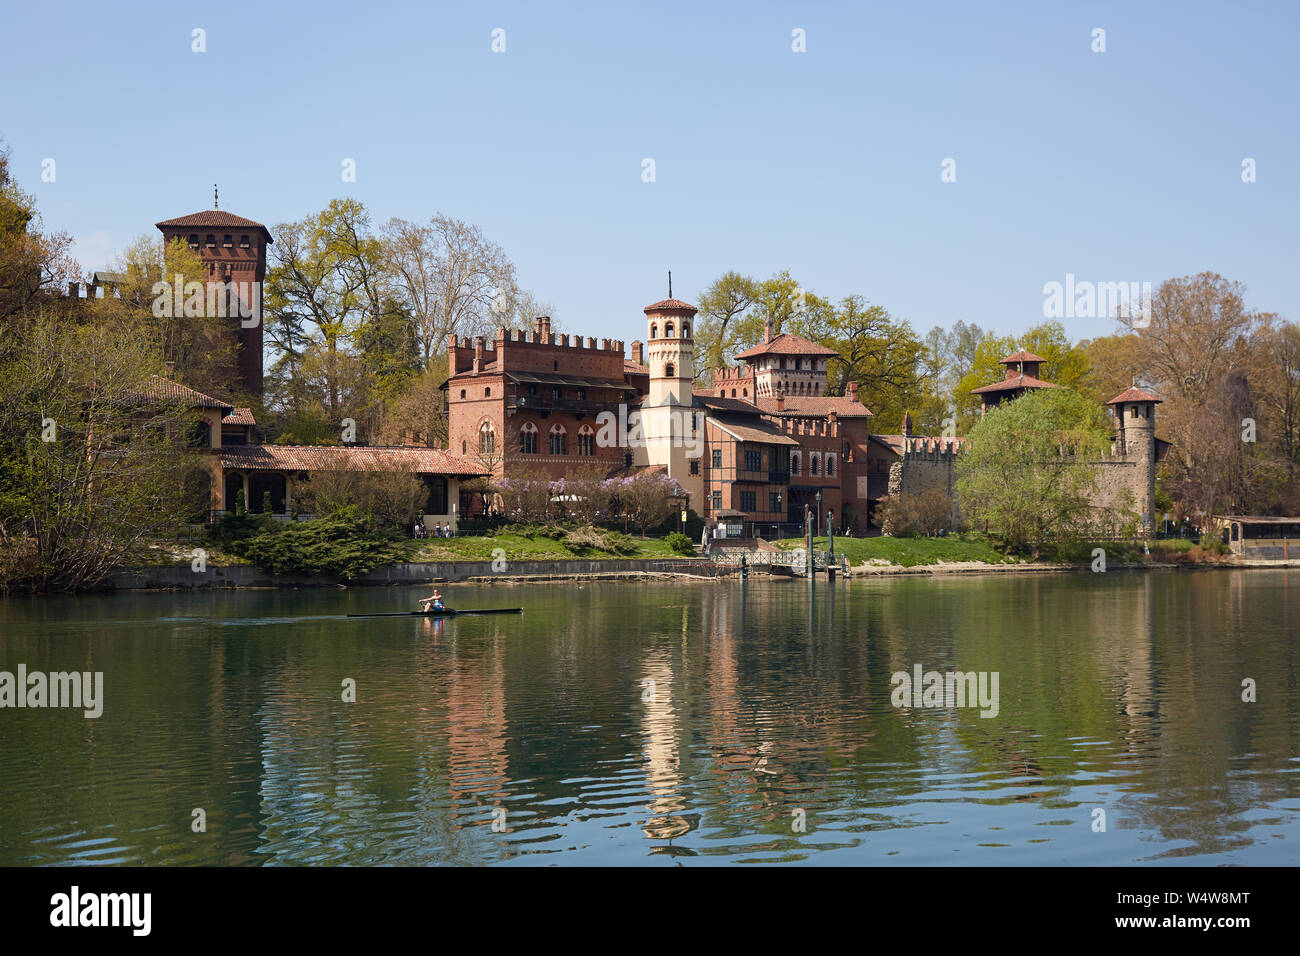 TURIN, ITALY - MARCH 31, 2019: Borgo medievale, medieval village and castle with Po river in a sunny day, clear blue sky in Piedmont, Turin, Italy. Stock Photo